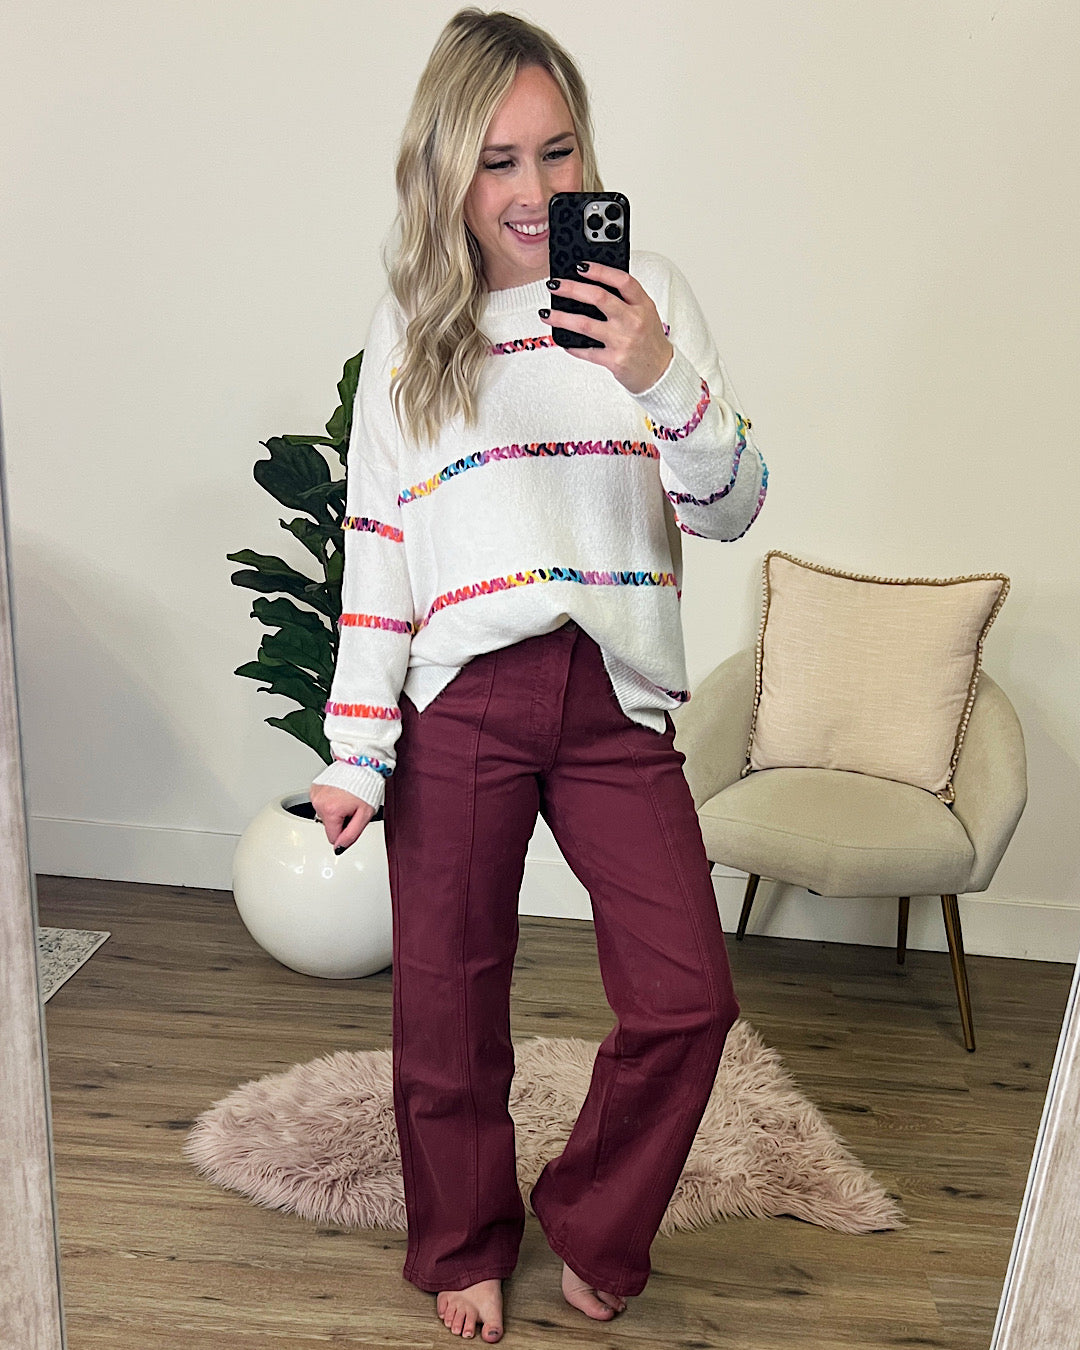 Dodged a Bullet Rainbow Stitch Sweater - Ivory  Staccato   